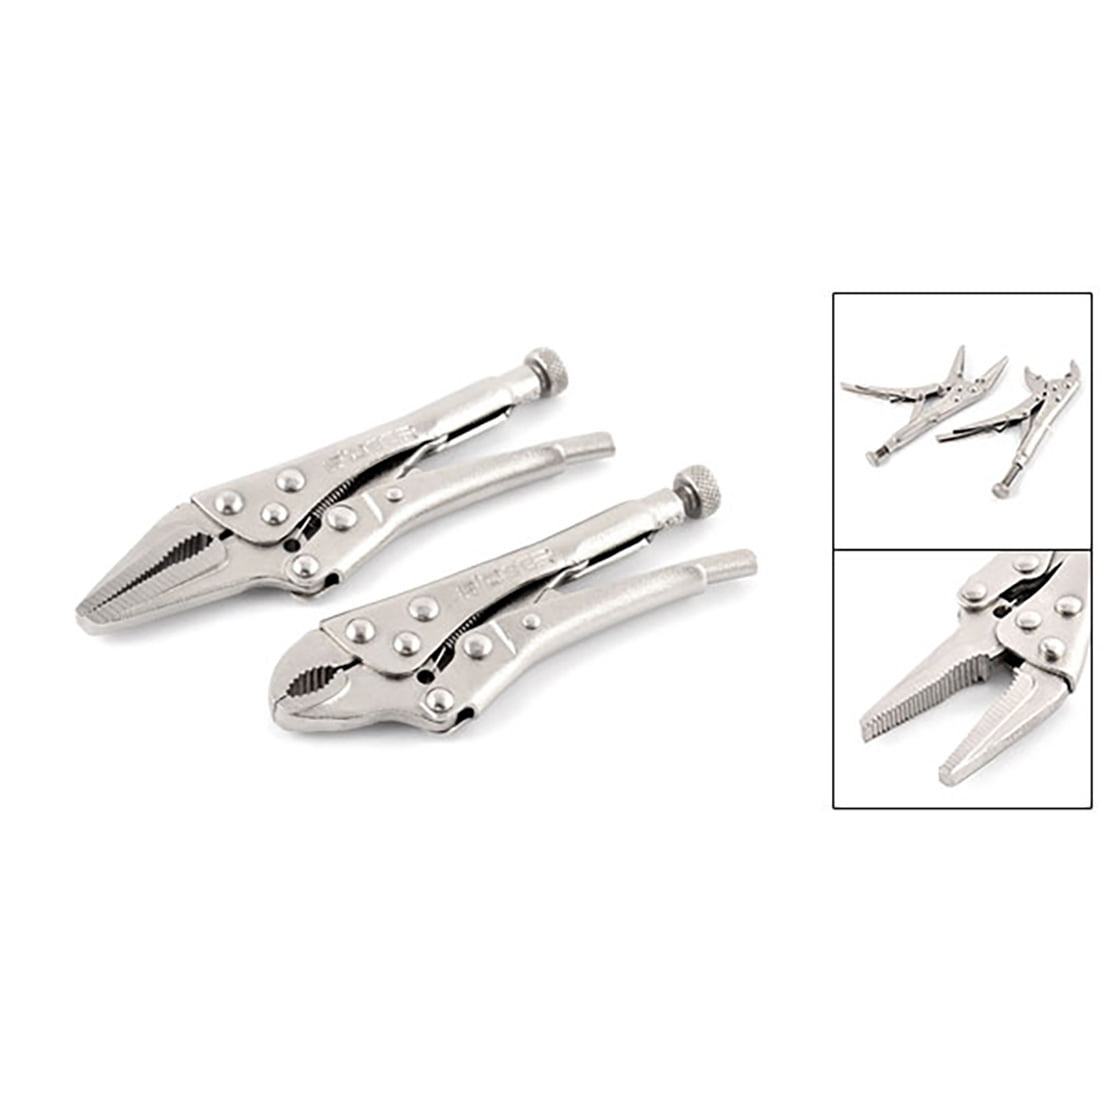 Extra Long Nose Locking Pliers Mole Grips Fully Adjustable Total length 15" 